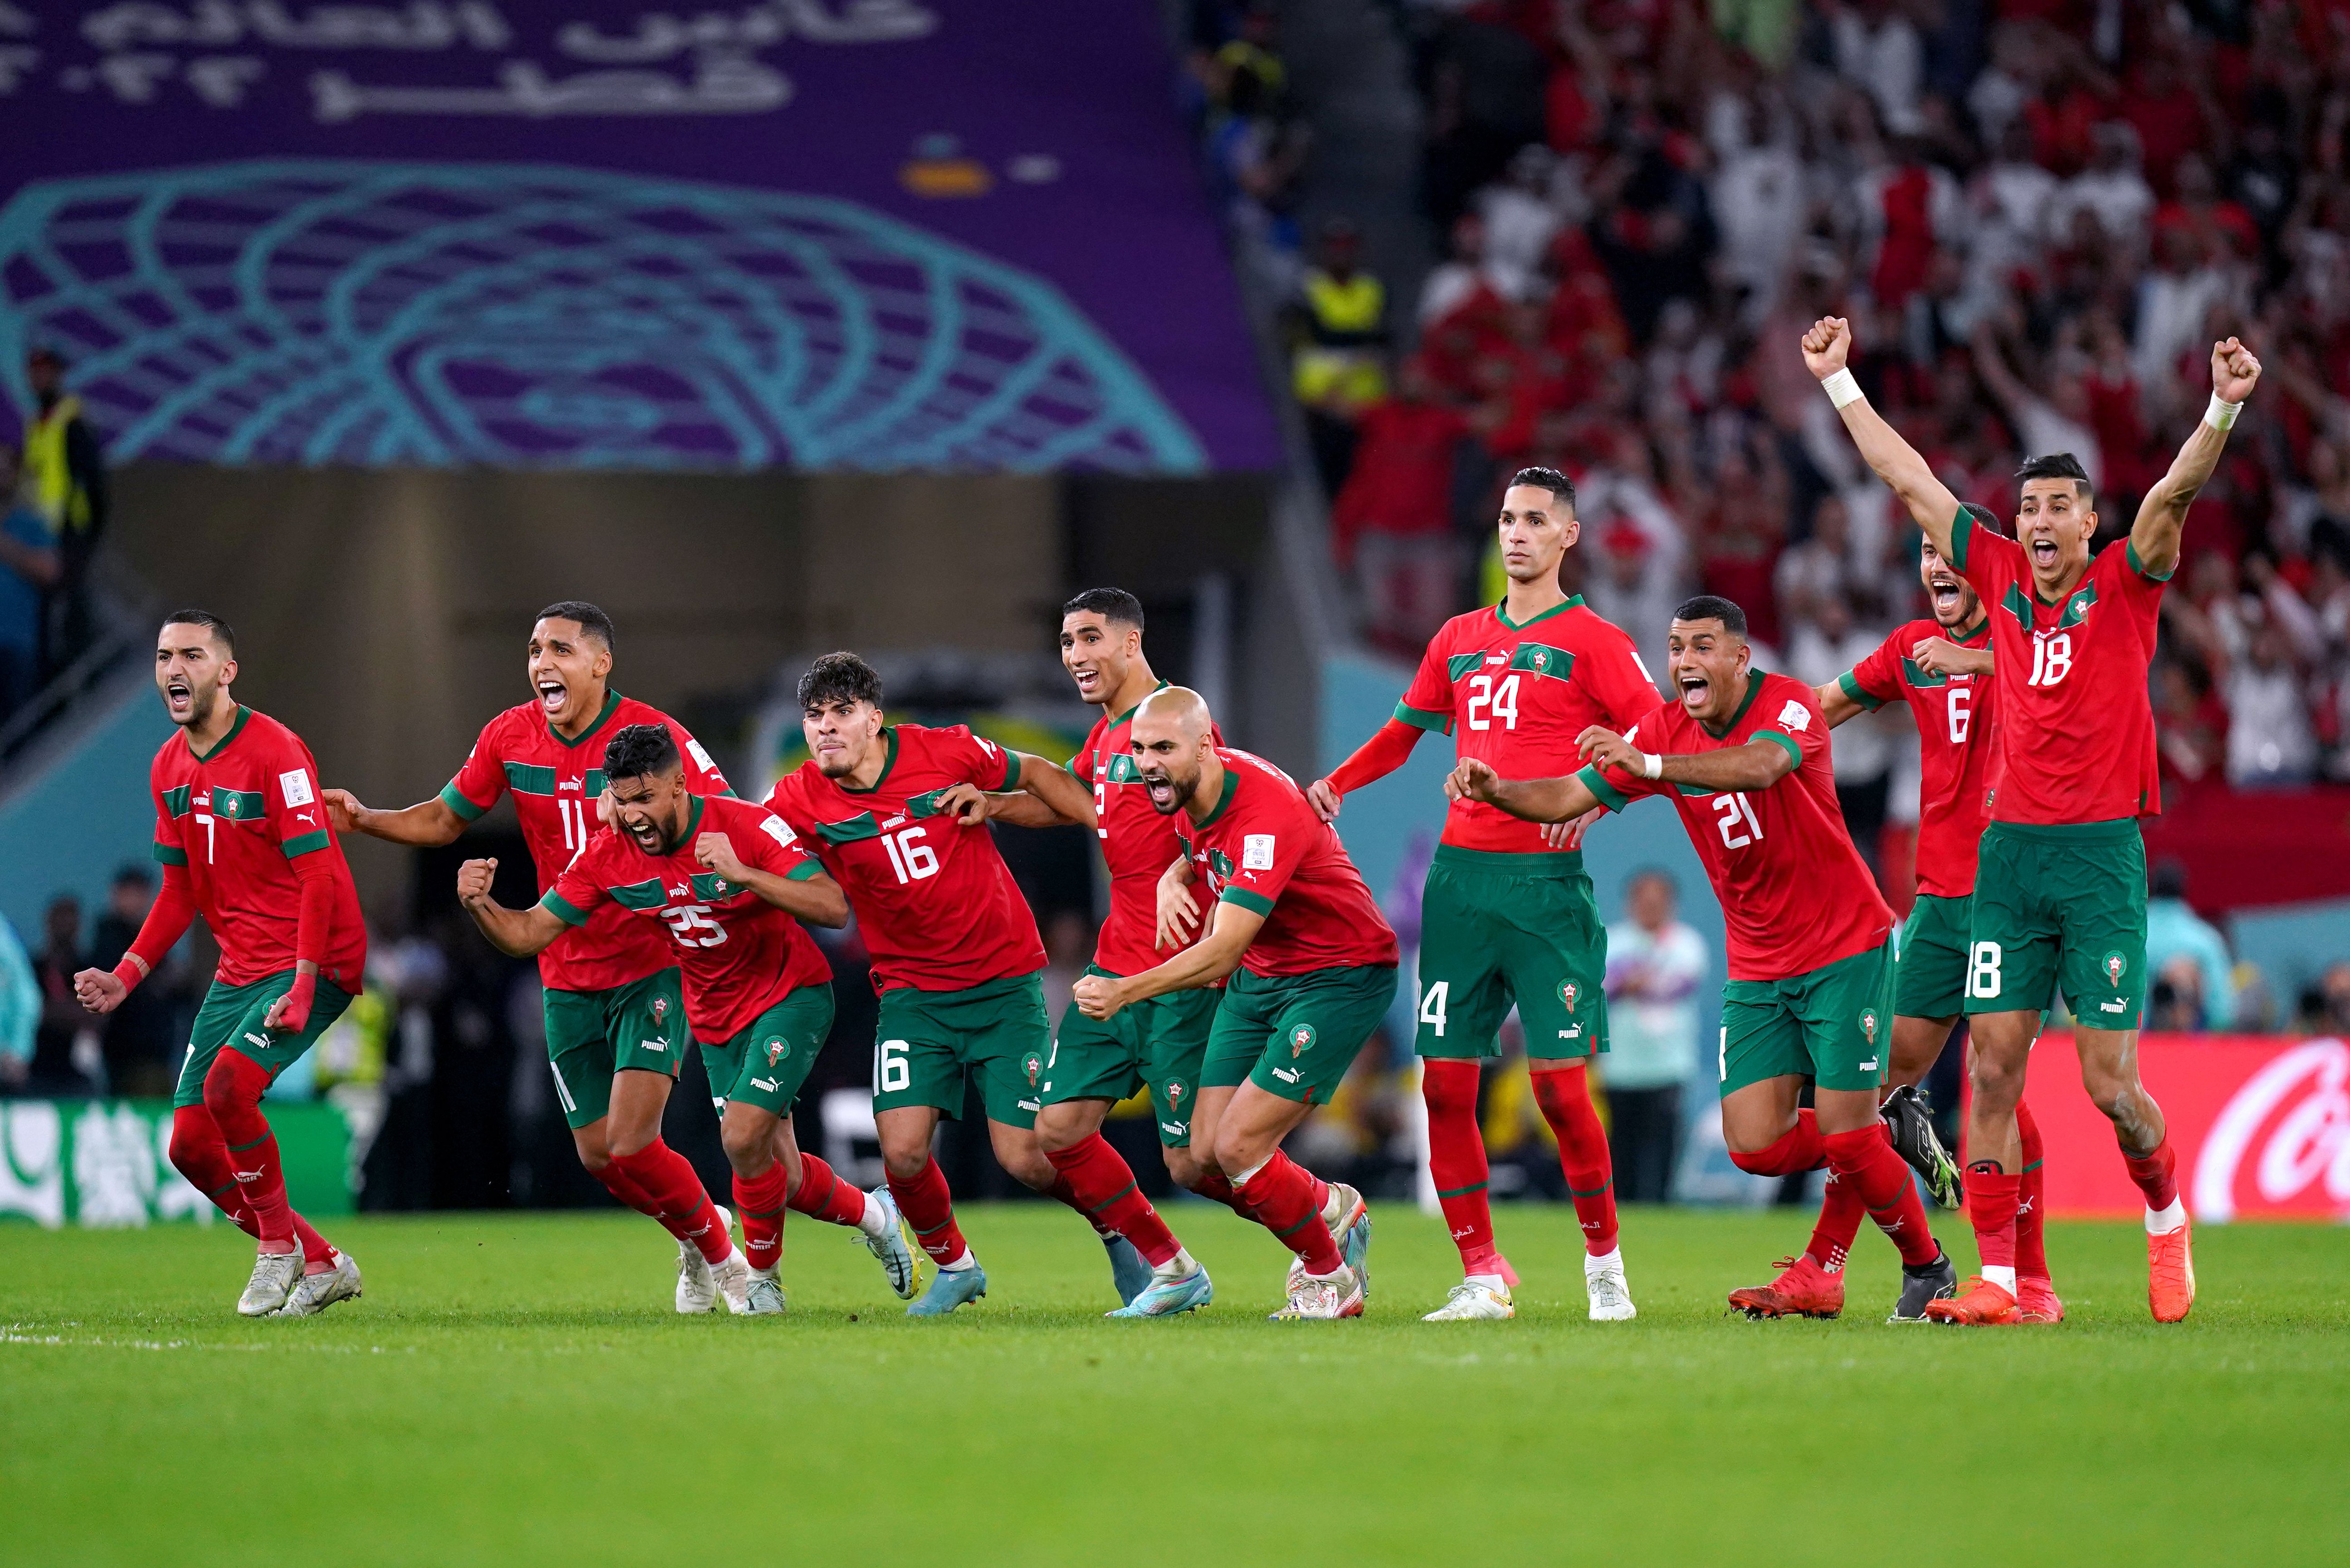 Morocco aim to emulate heroes of 1986 as more history beckons at 2022 World Cup